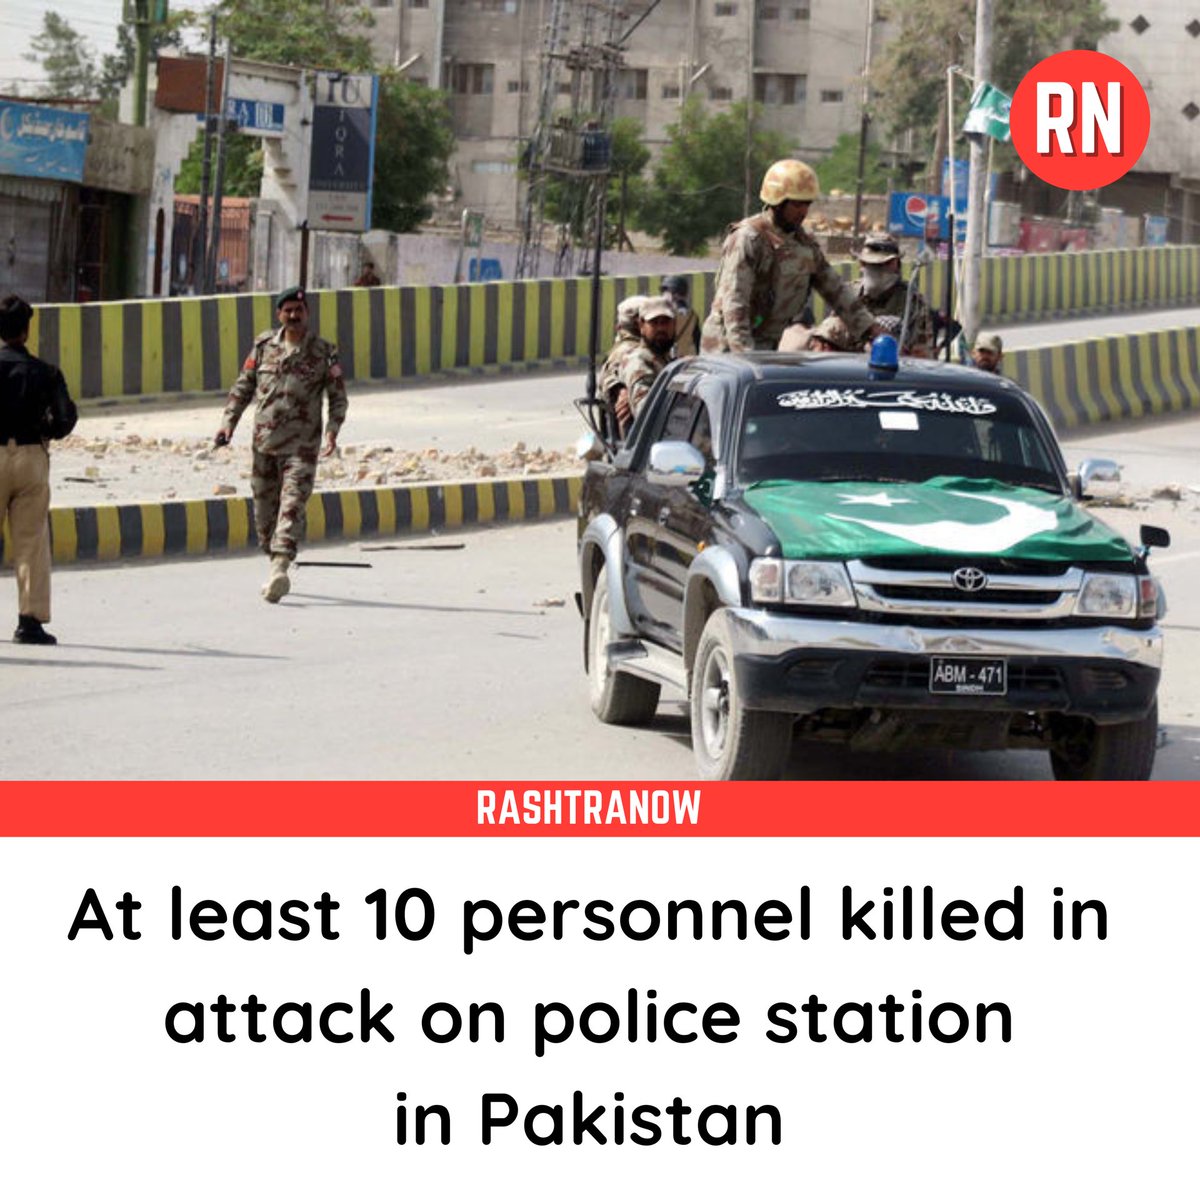 BREAKING: At least 10 personnel killed in attack on police station in Pakistan.